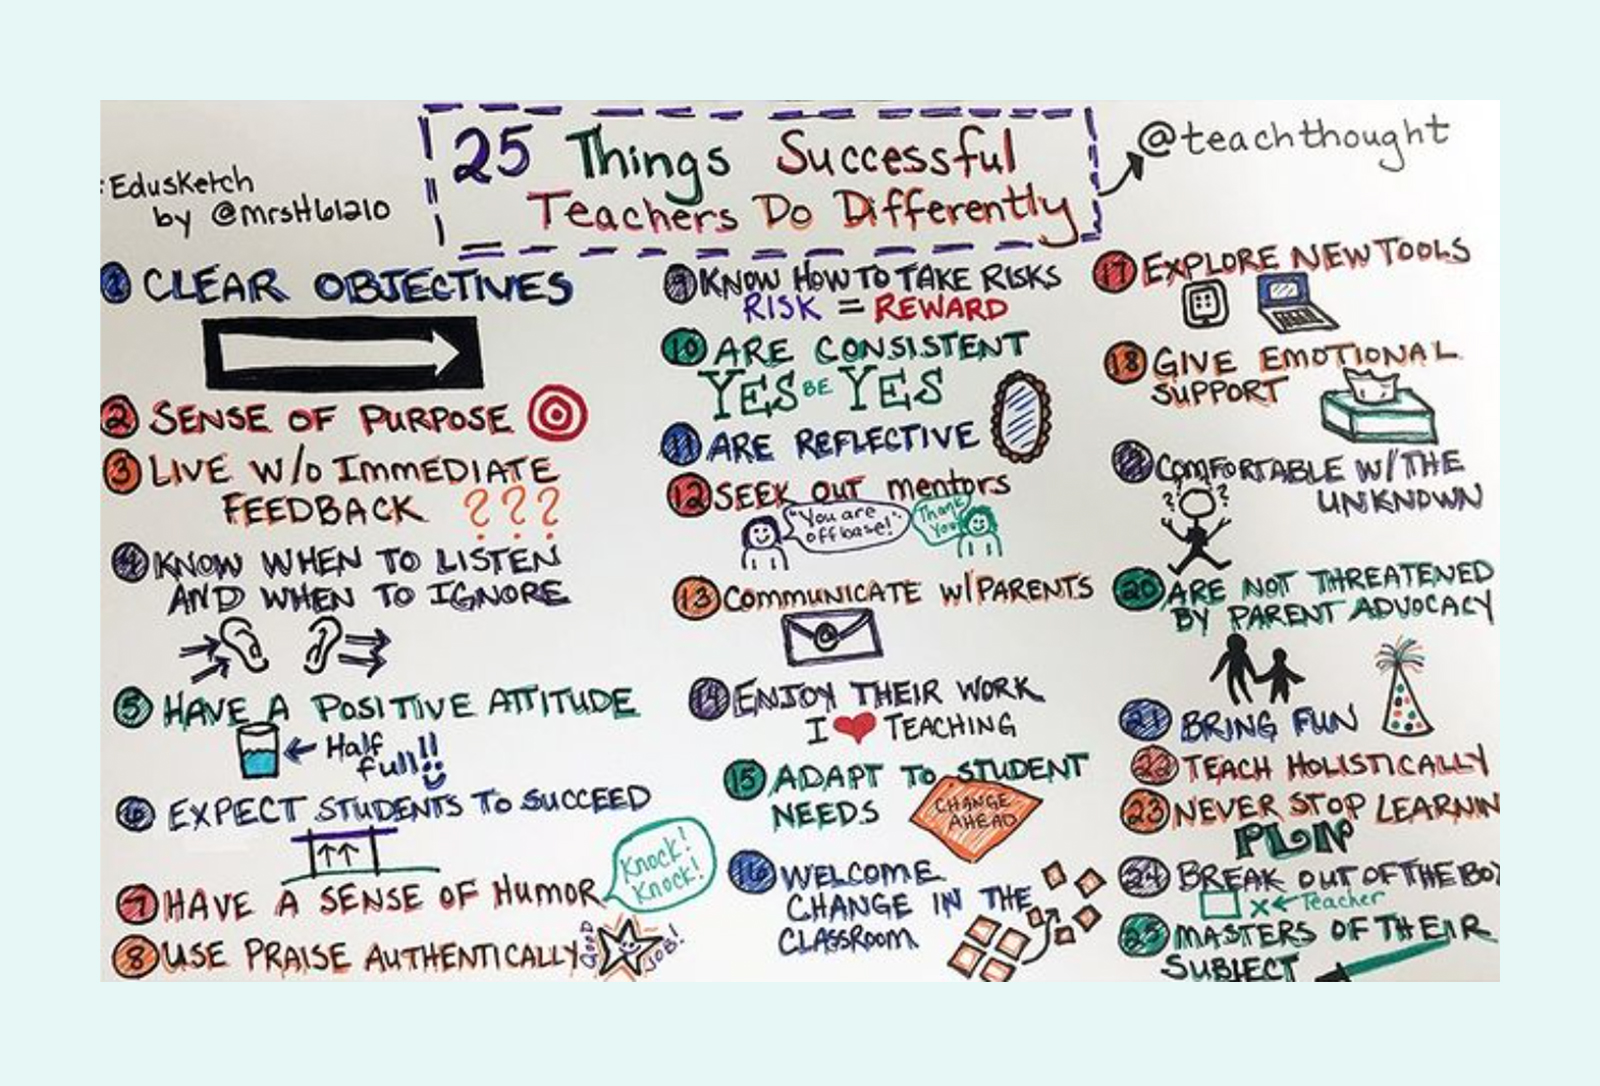 A handwritten list of 25 things successful teachers do differently in colorful dry erase markers on a whiteboard